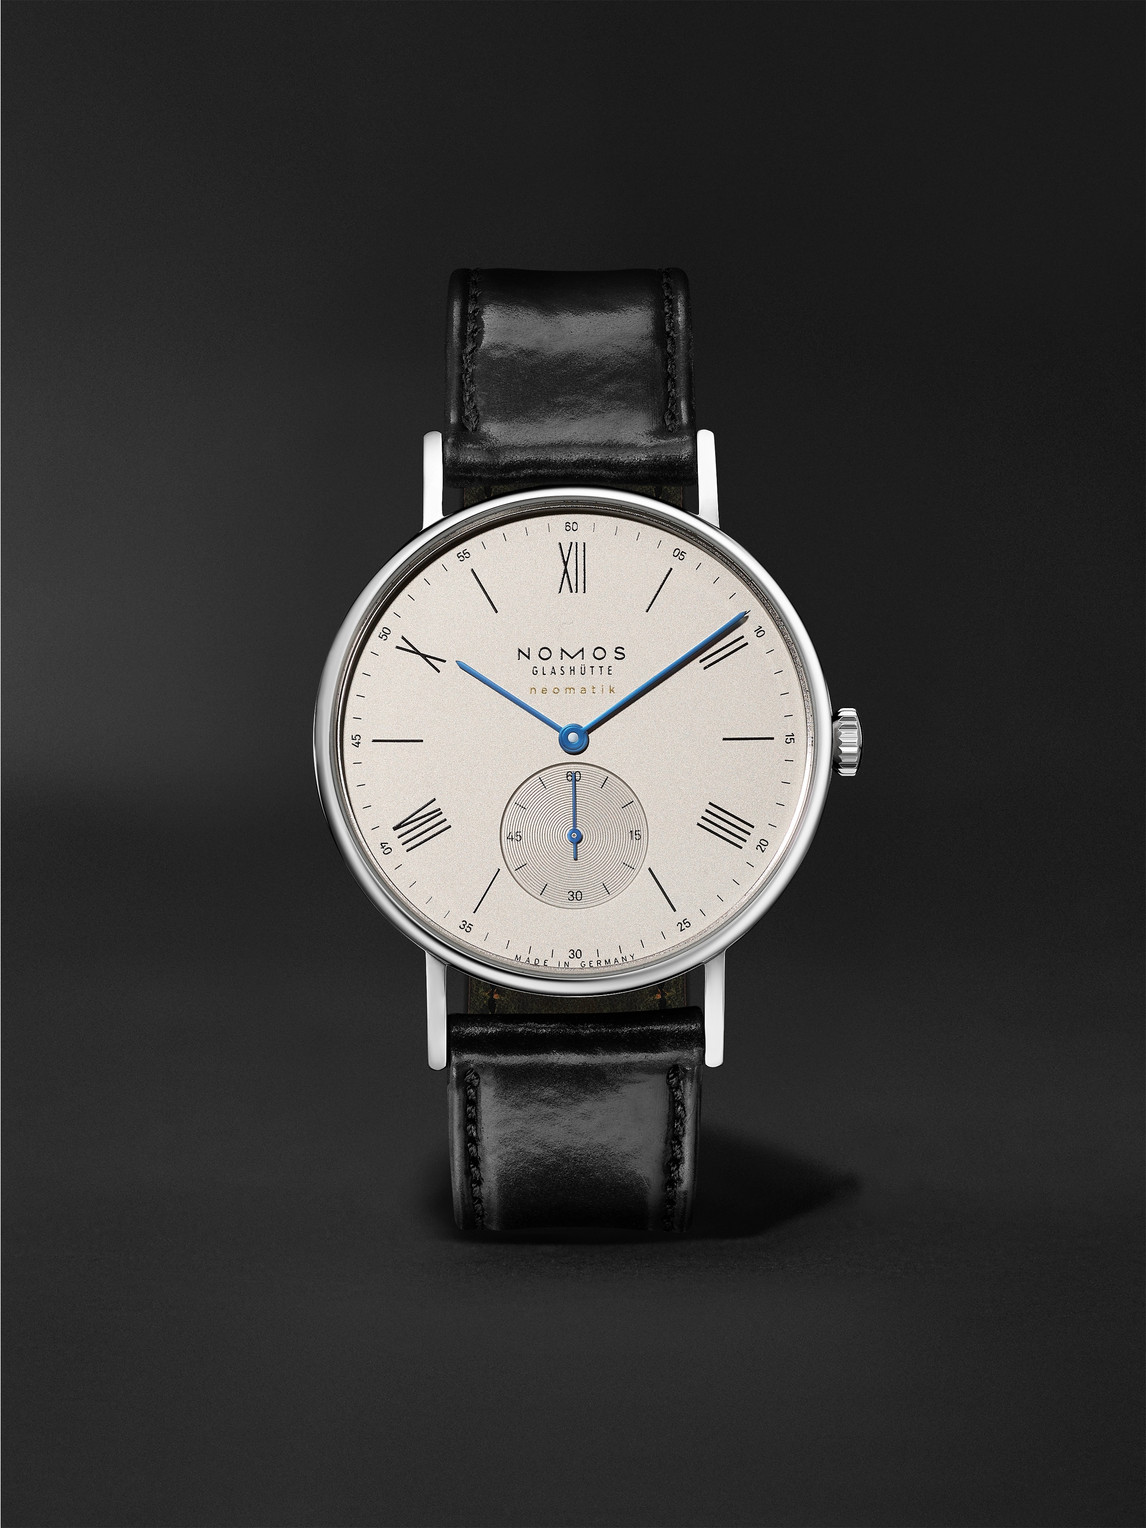 Nomos Glashütte Ludwig Neomatik 39 Automatic 38.5mm Stainless Steel And Leather Watch, Ref. No. 250 In White